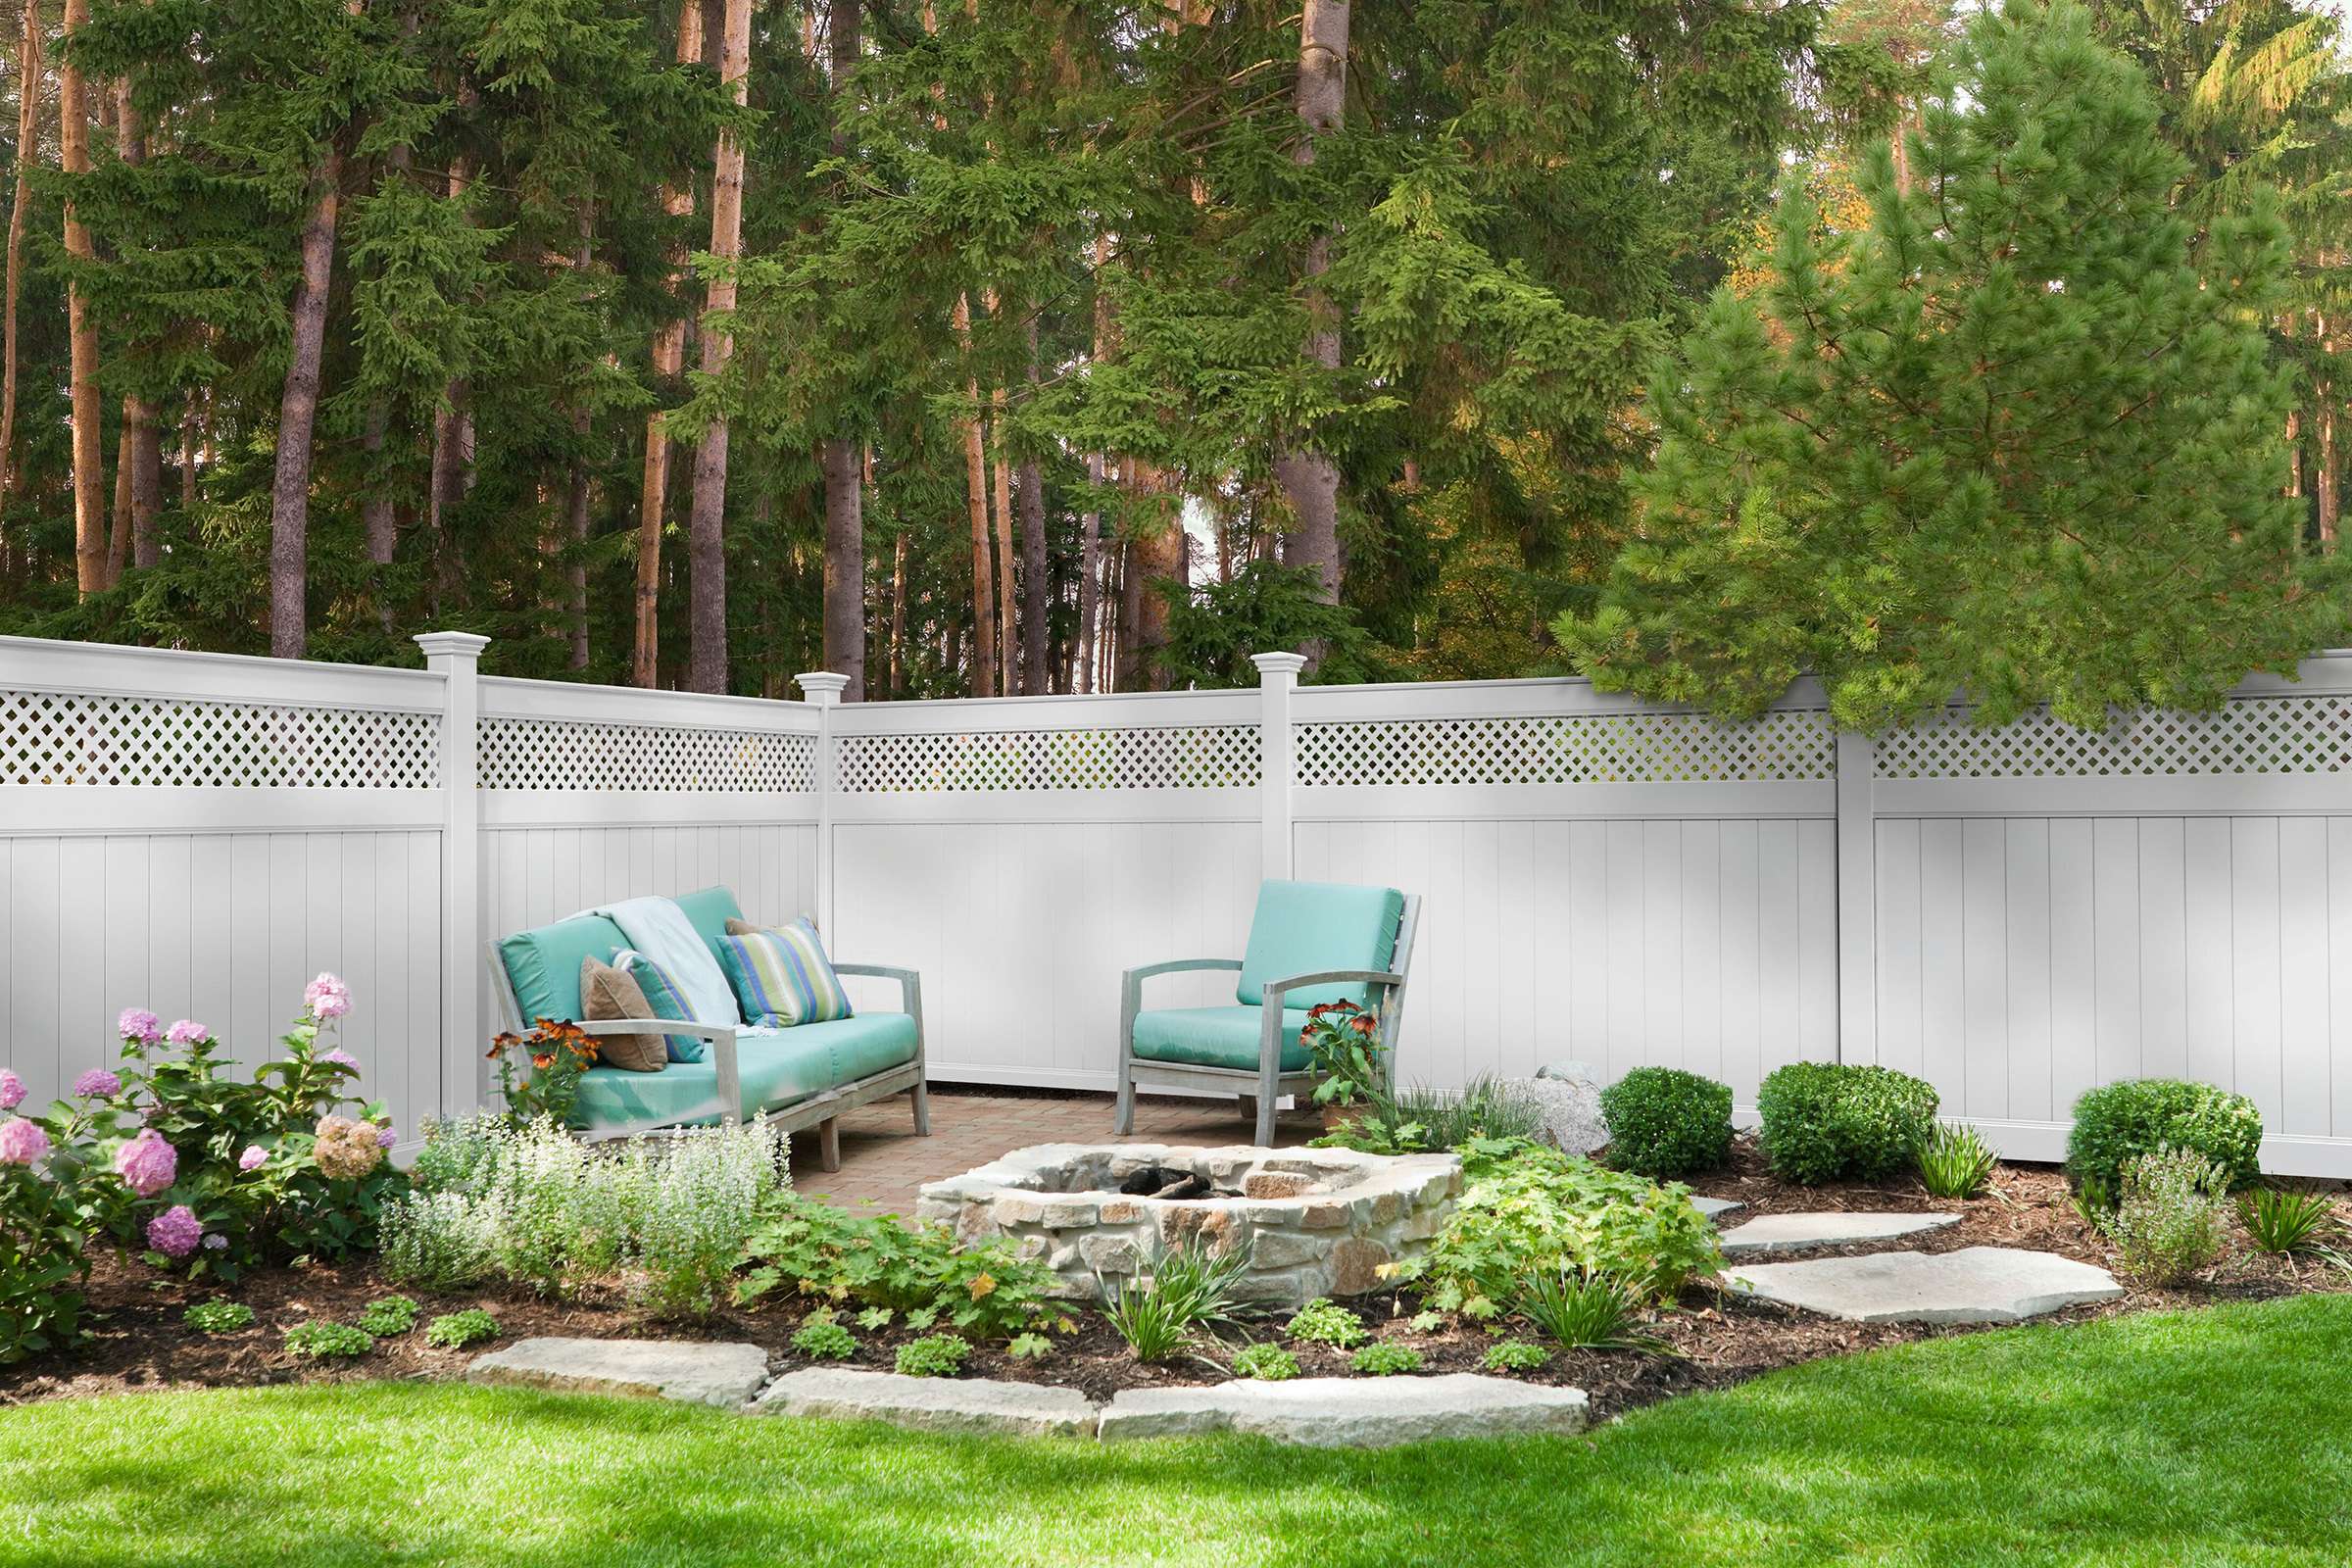 Enhance Your Property with Carl's Fencing in NJ